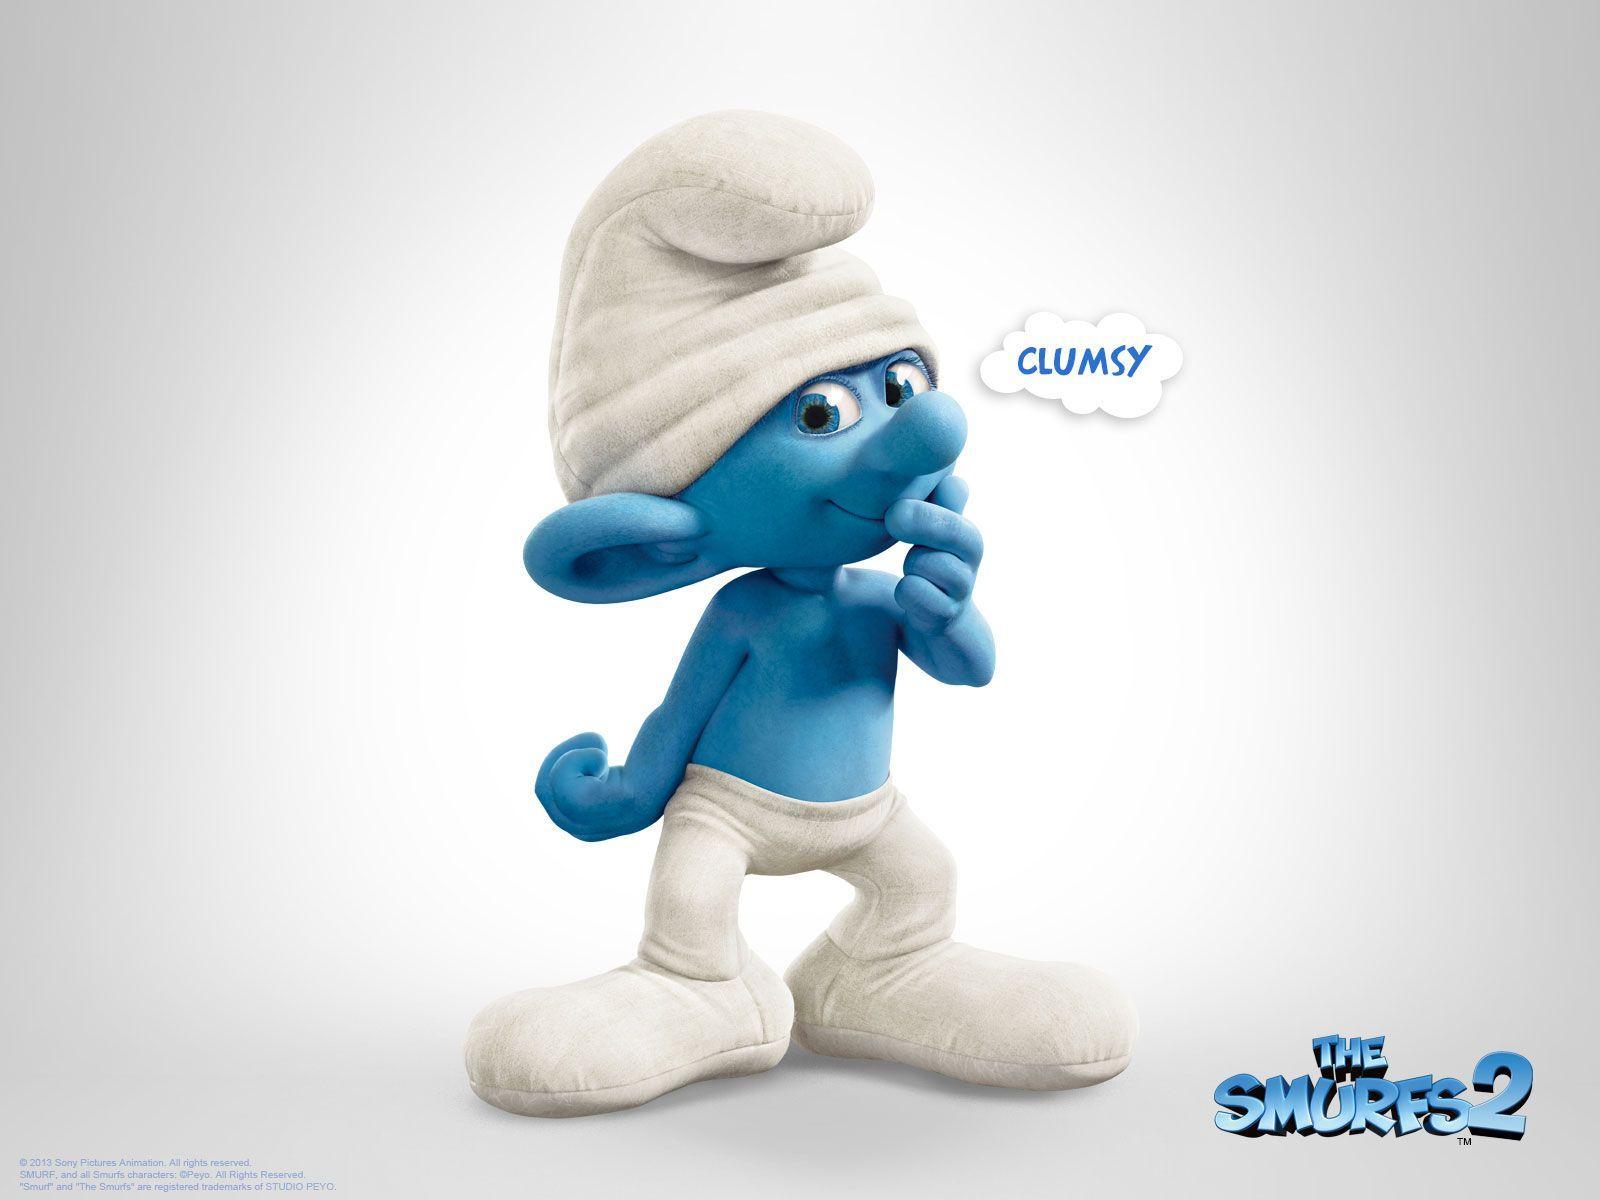 The Smurfs 2 (2013) Wallpaper, Facebook Cover Photo & Characters